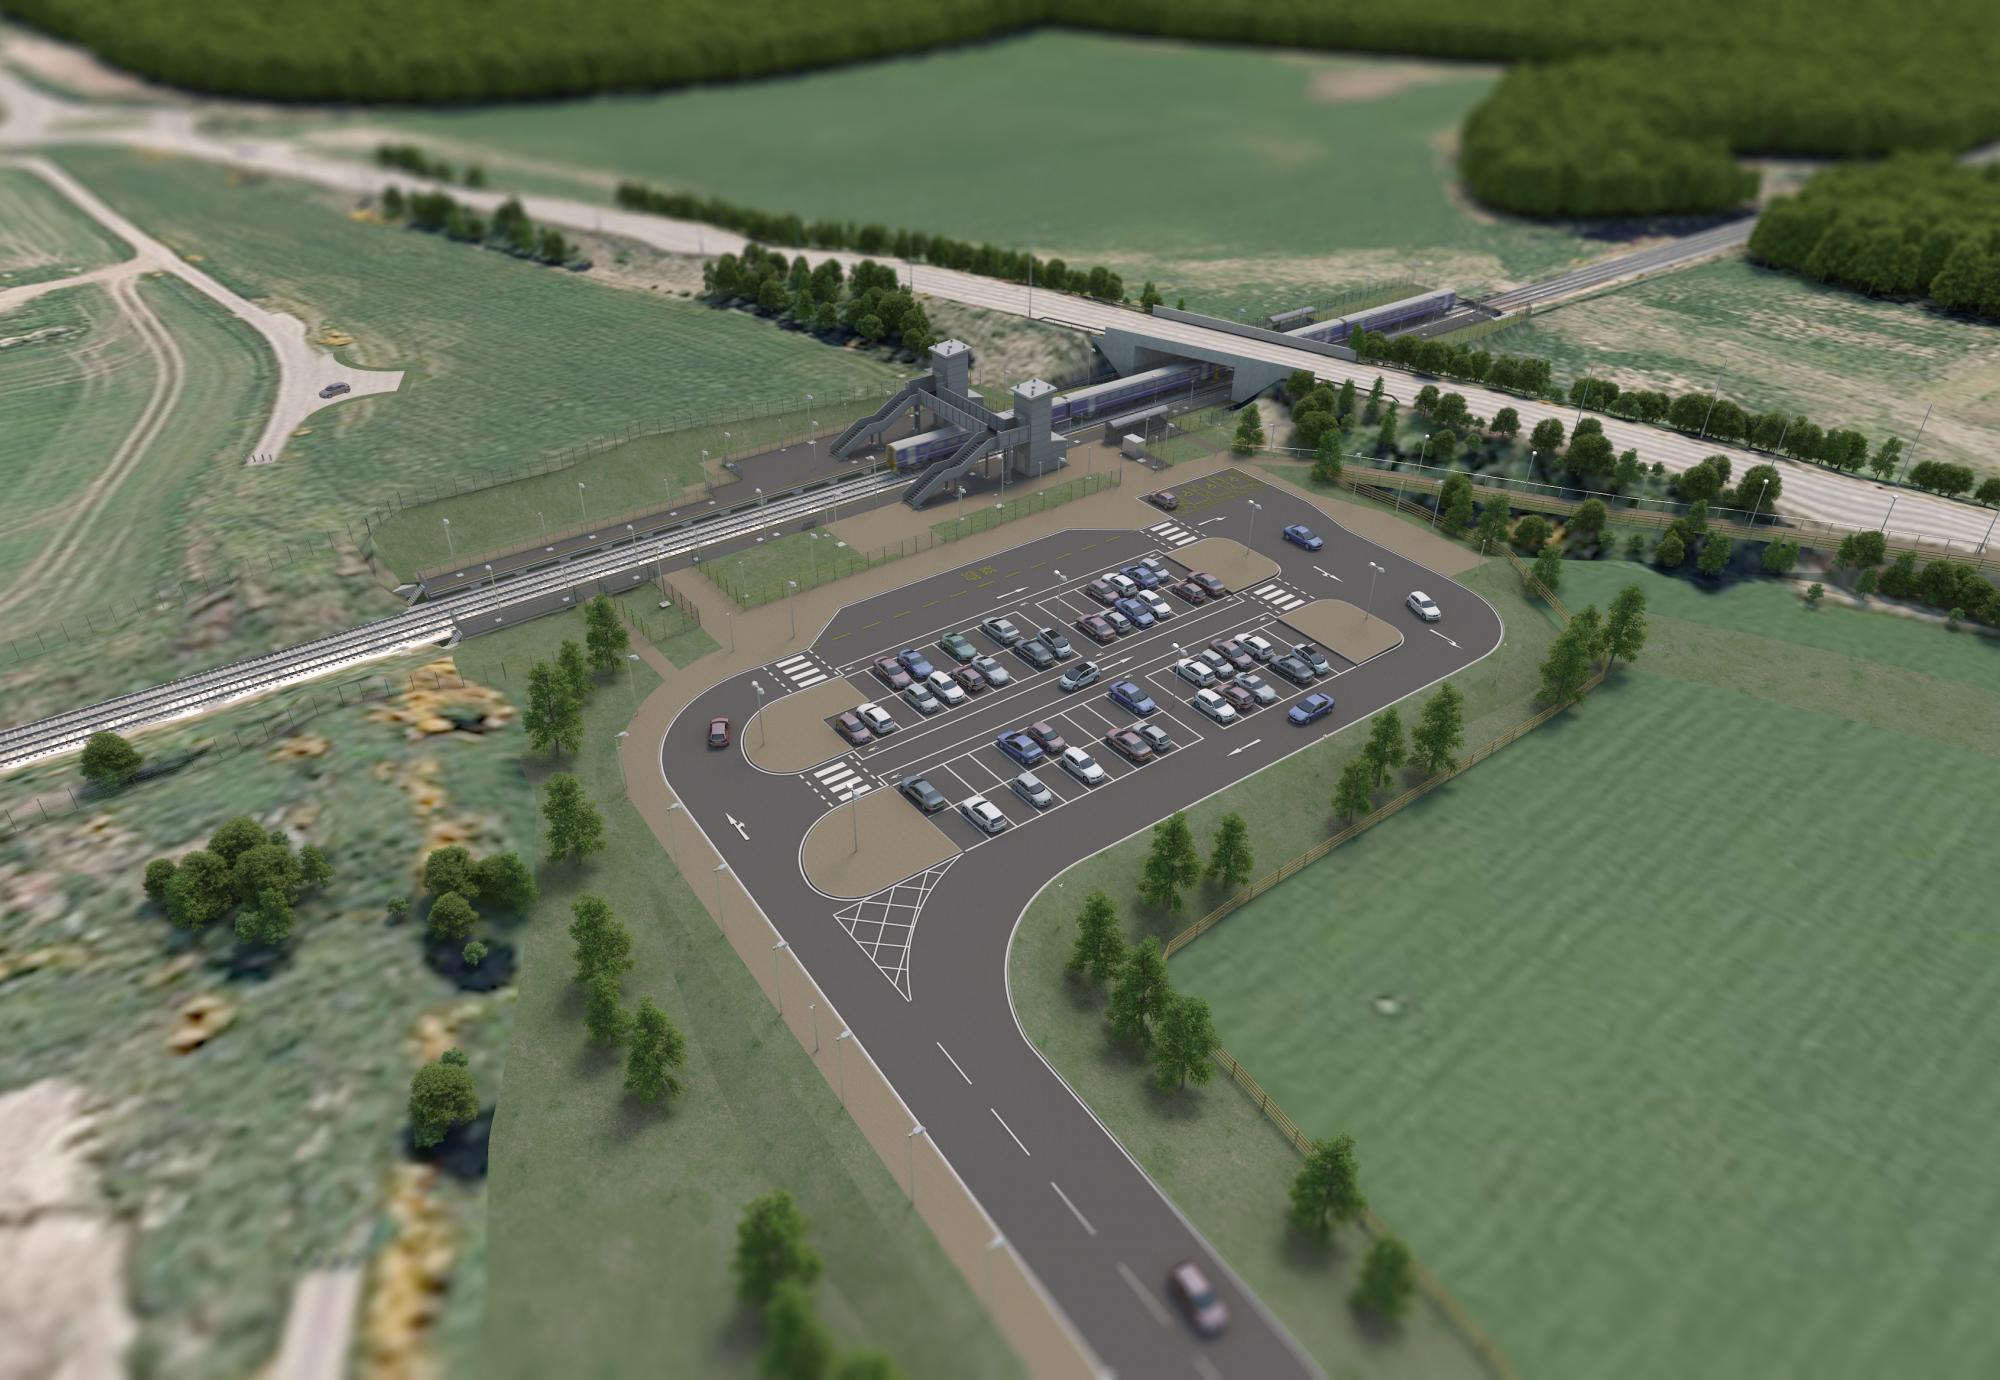 Artist impression of the new Inverness Airport station